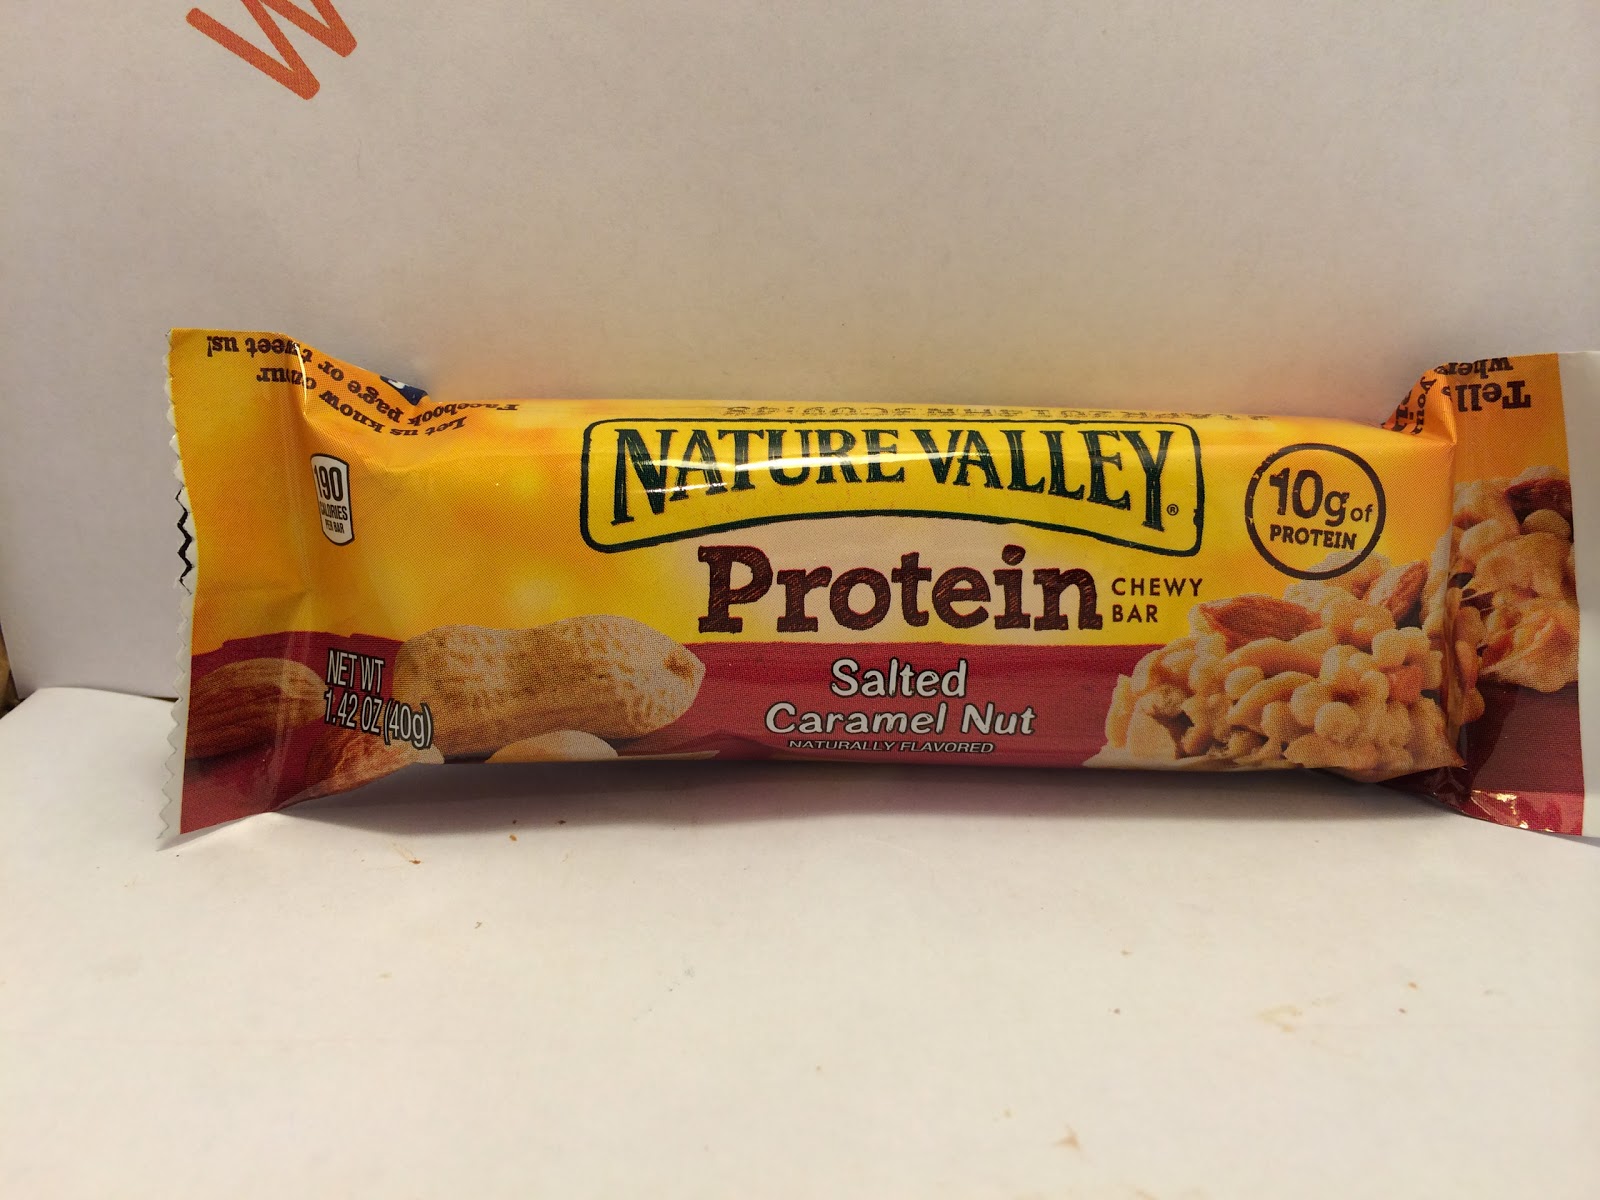 Tryk ned Udøve sport erotisk Crazy Food Dude: Review: Nature Valley Salted Caramel Nut Protein Chewy Bar